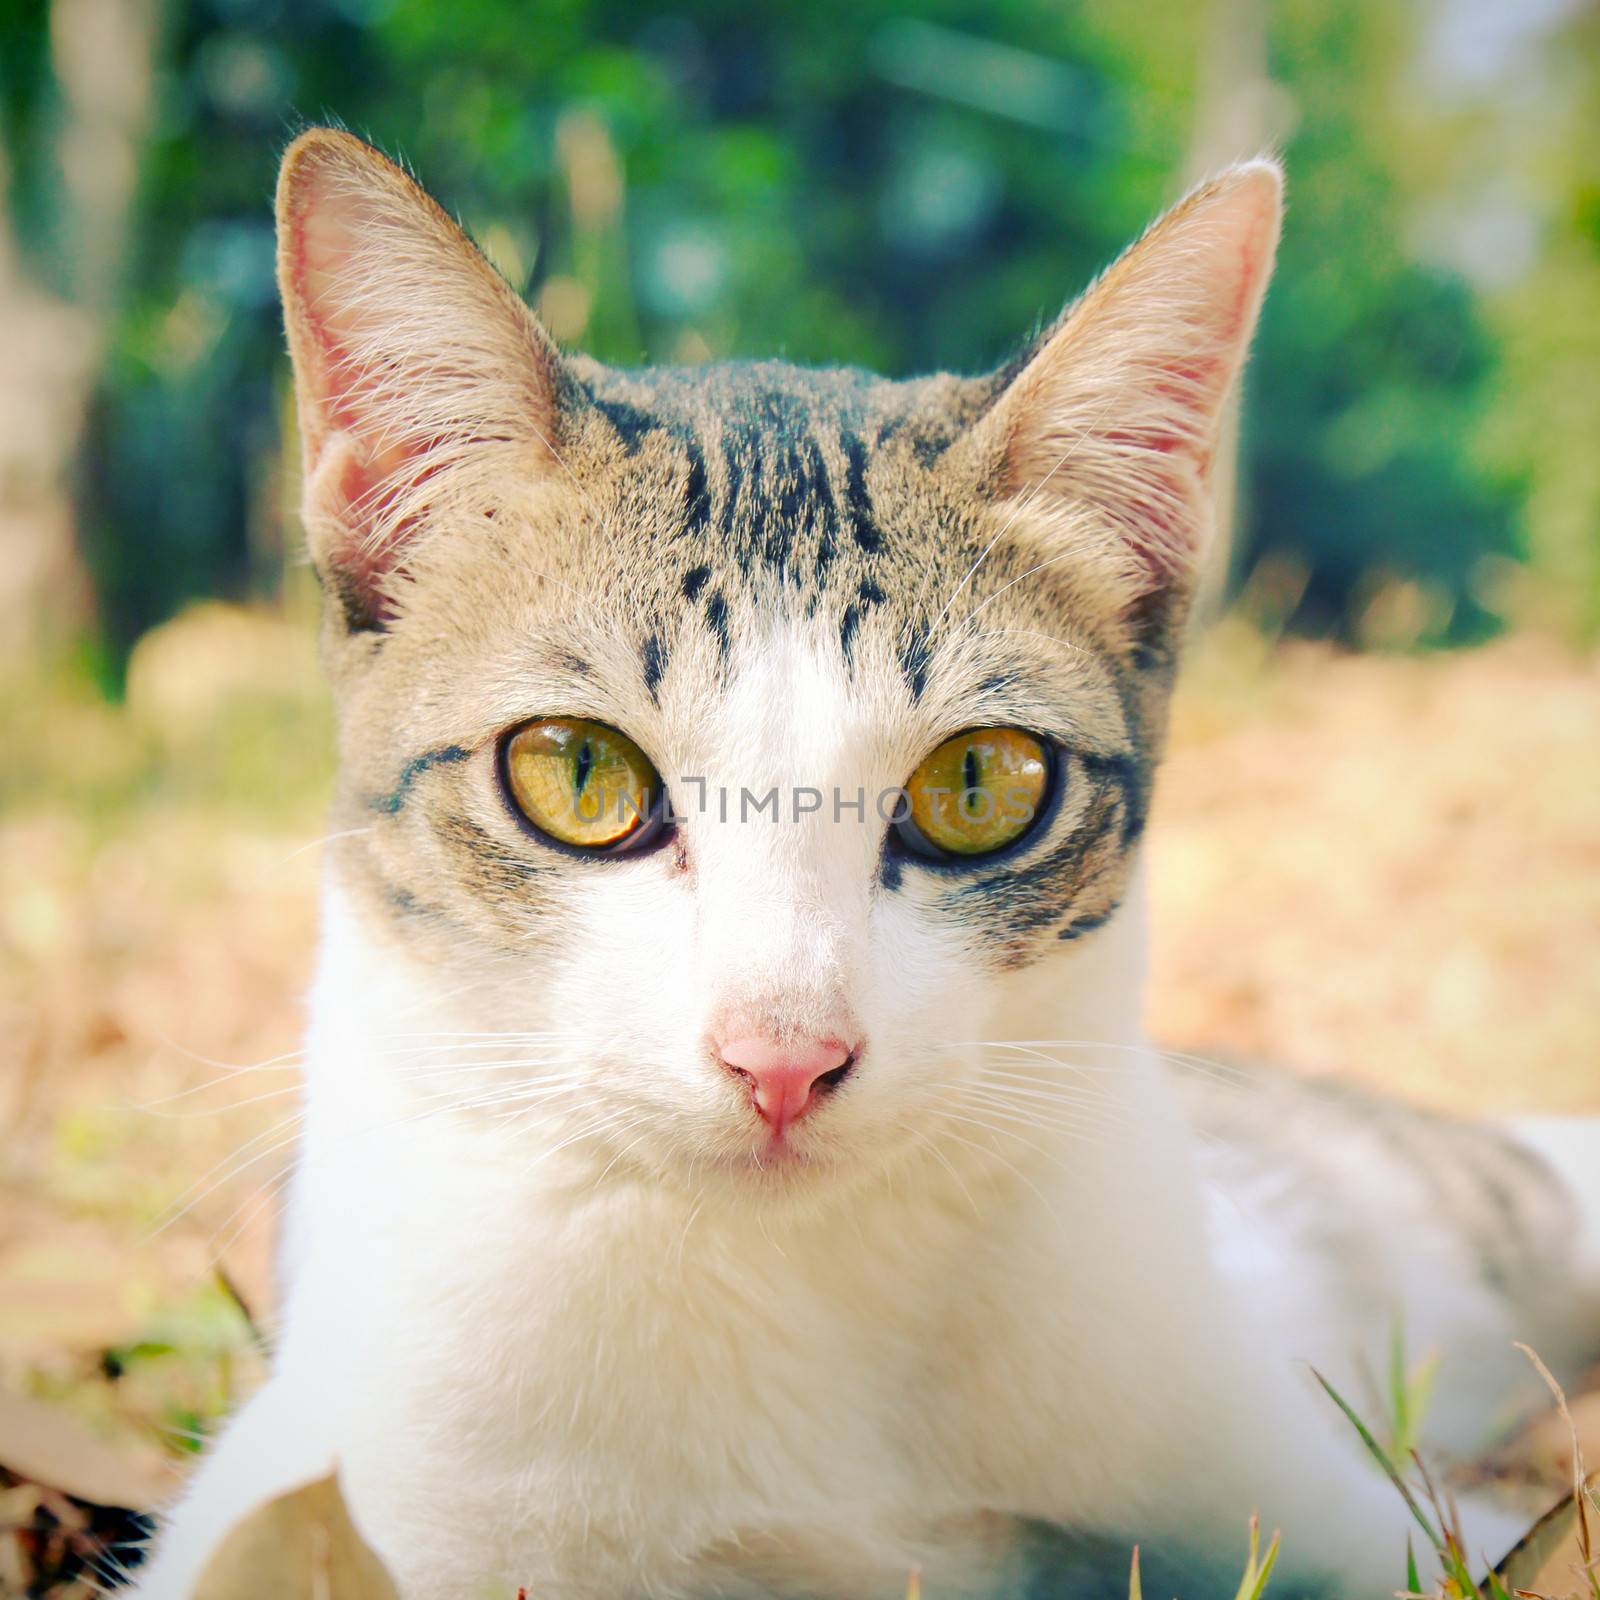 cute cat lying on grass in the garden with retro filter effect by nuchylee